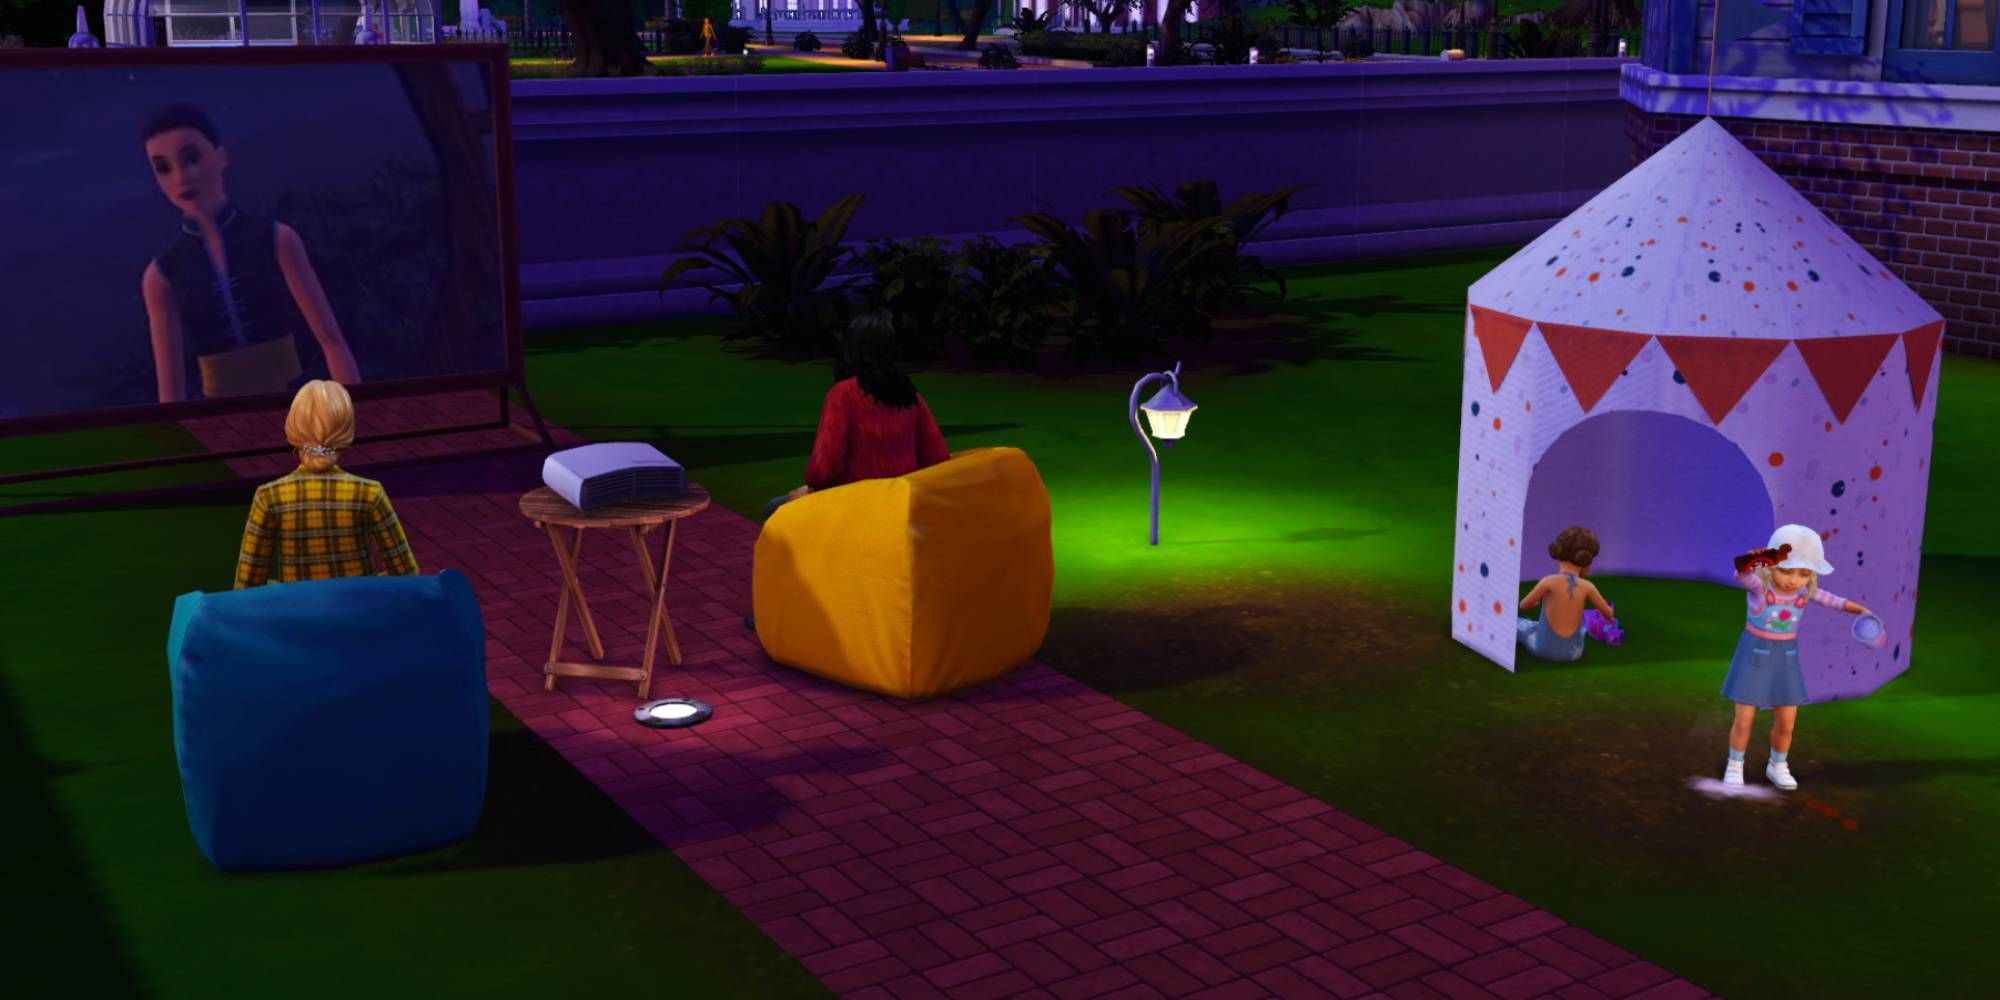 Sims enjoying watching a movie outdoors on a projector screen